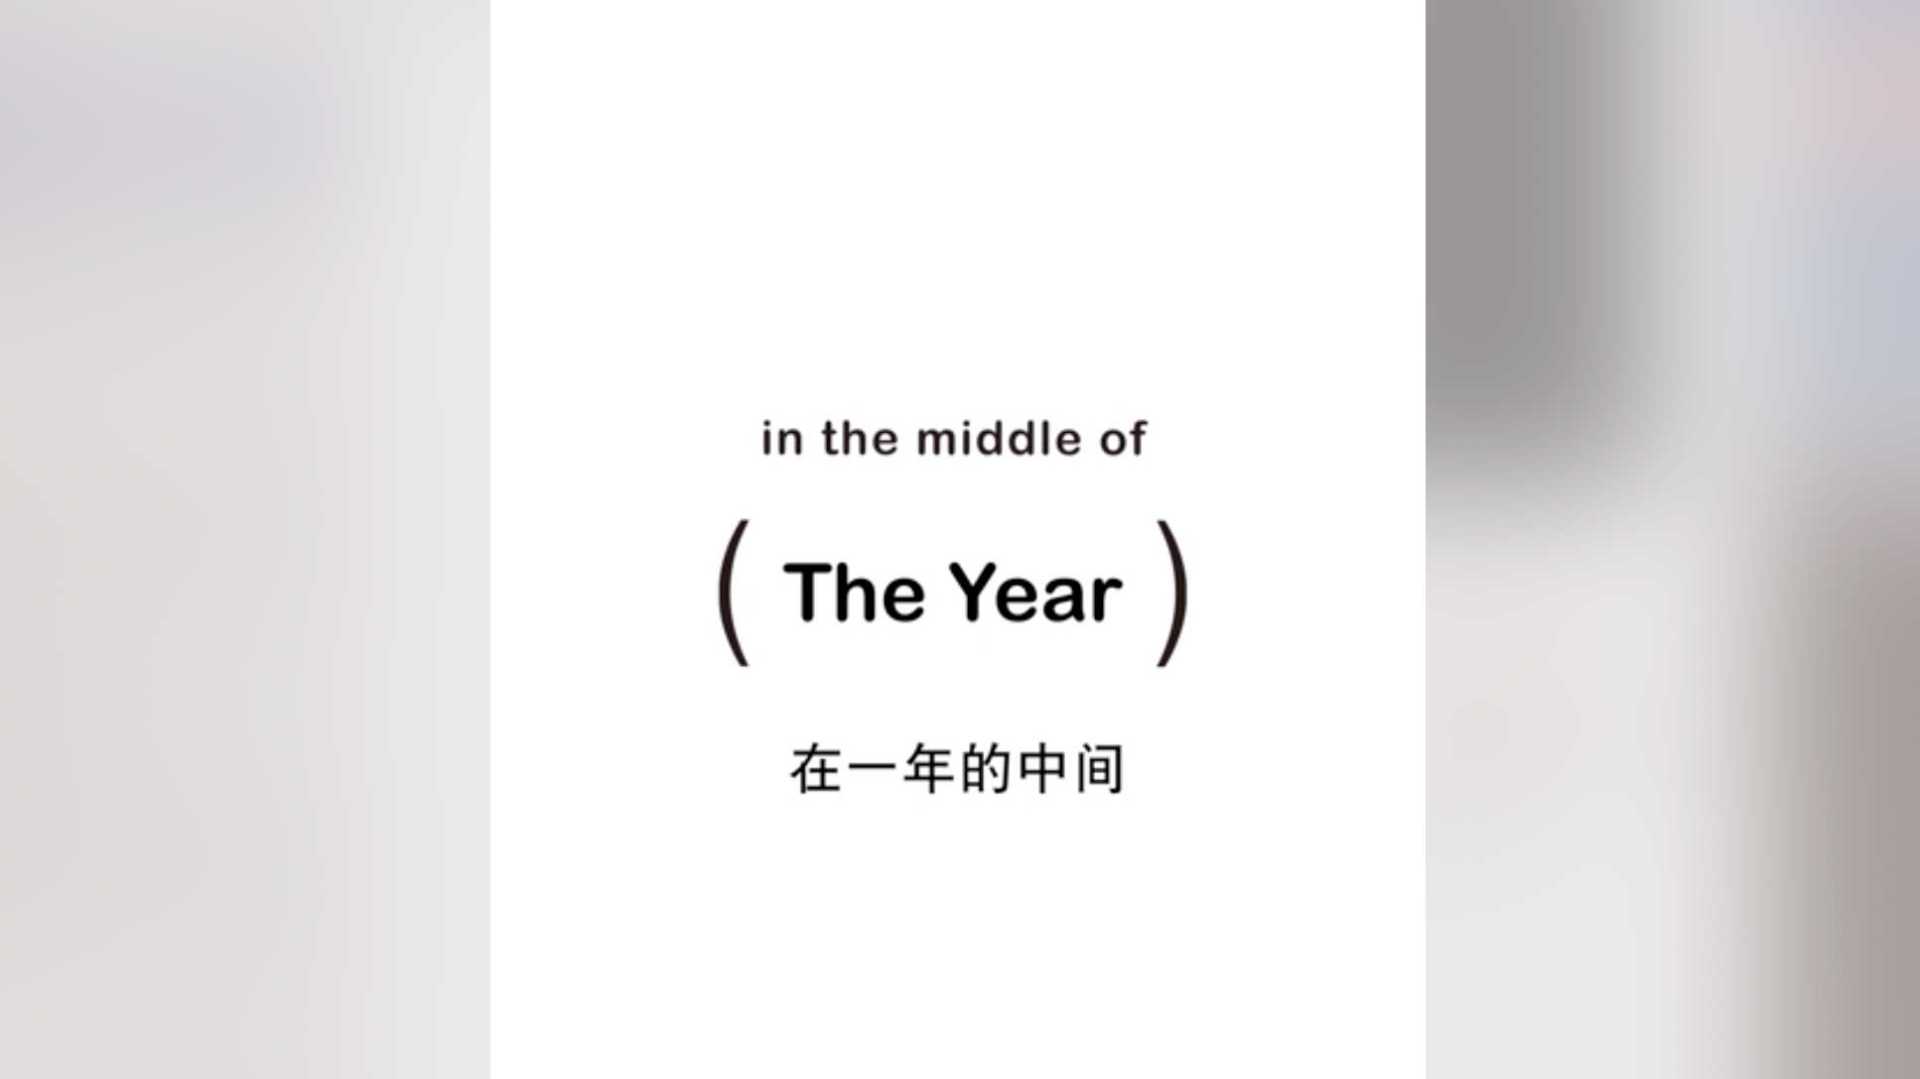 The Middle of The Year - 京东618